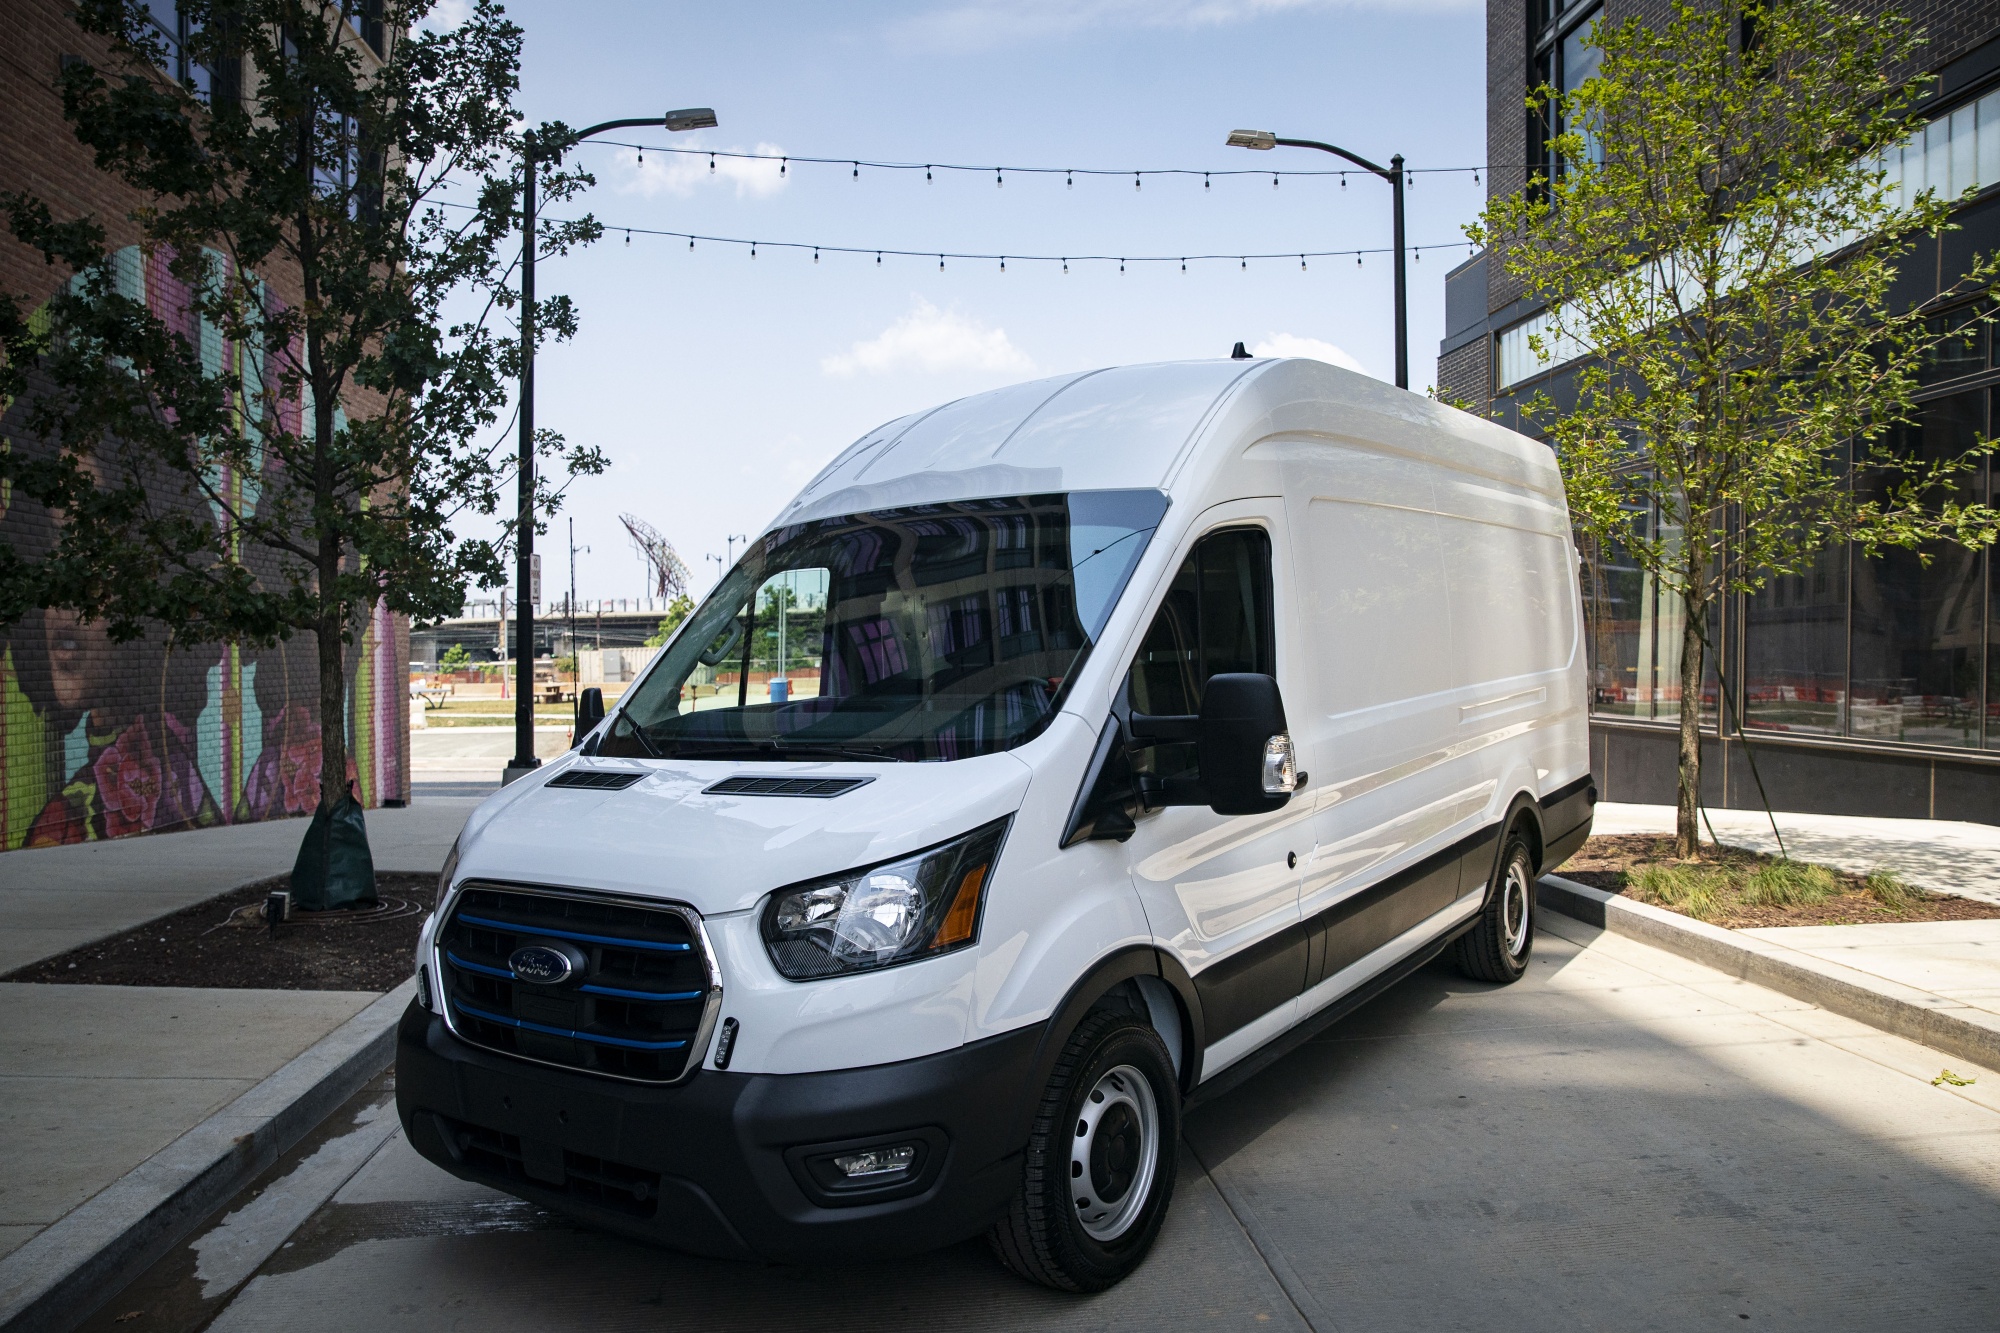 A Ford Motor Co. E-Transit electric vehicle.